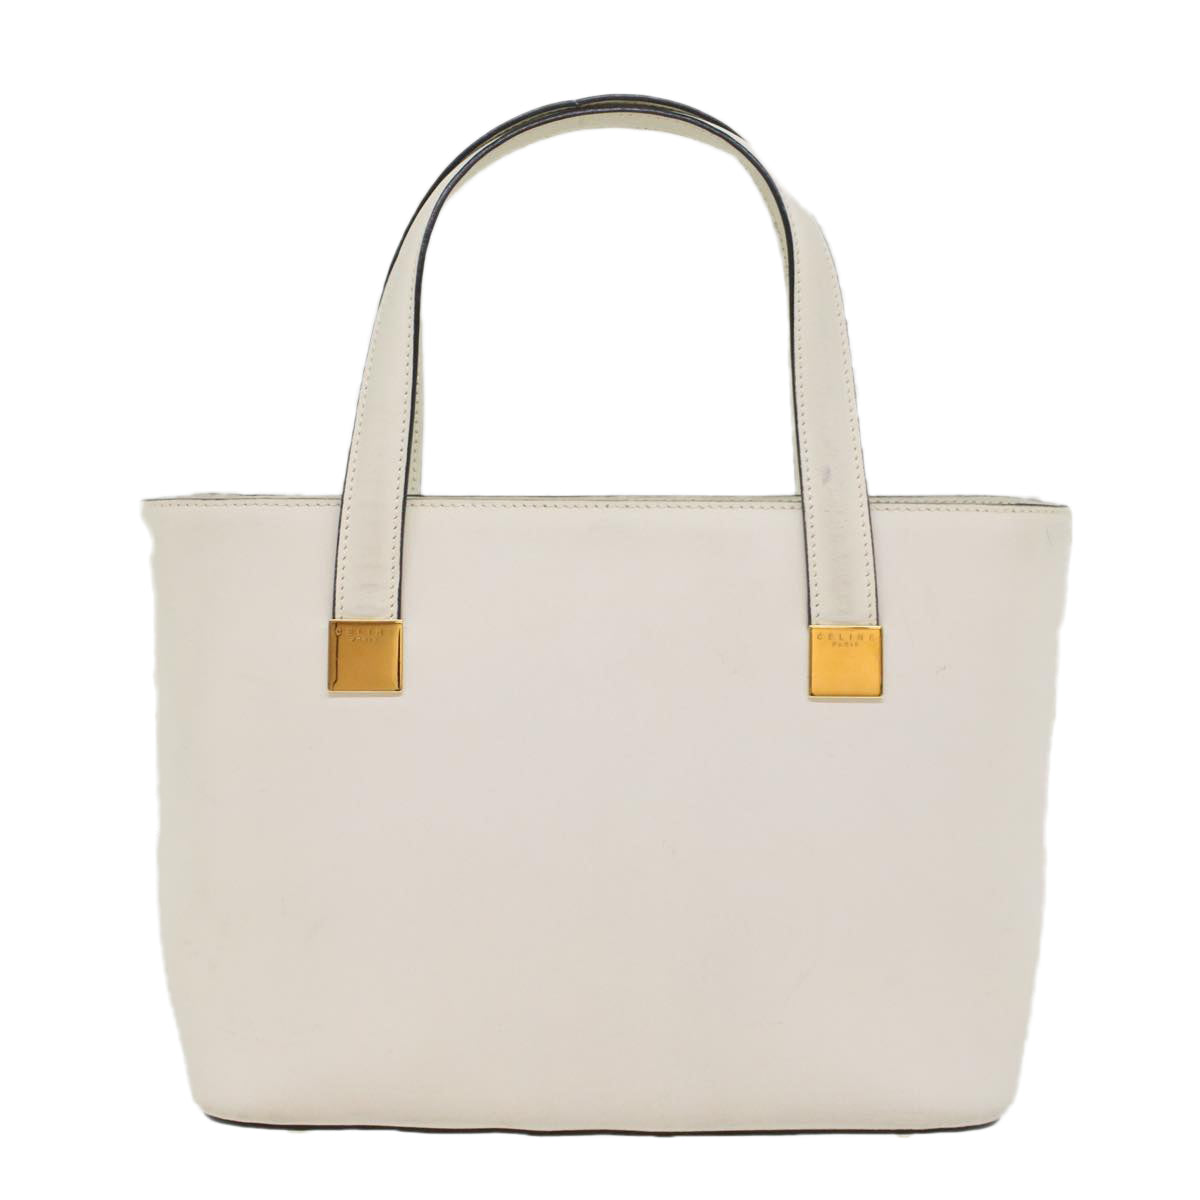 CELINE Tote Bag Leather White Auth bs7871 - 0